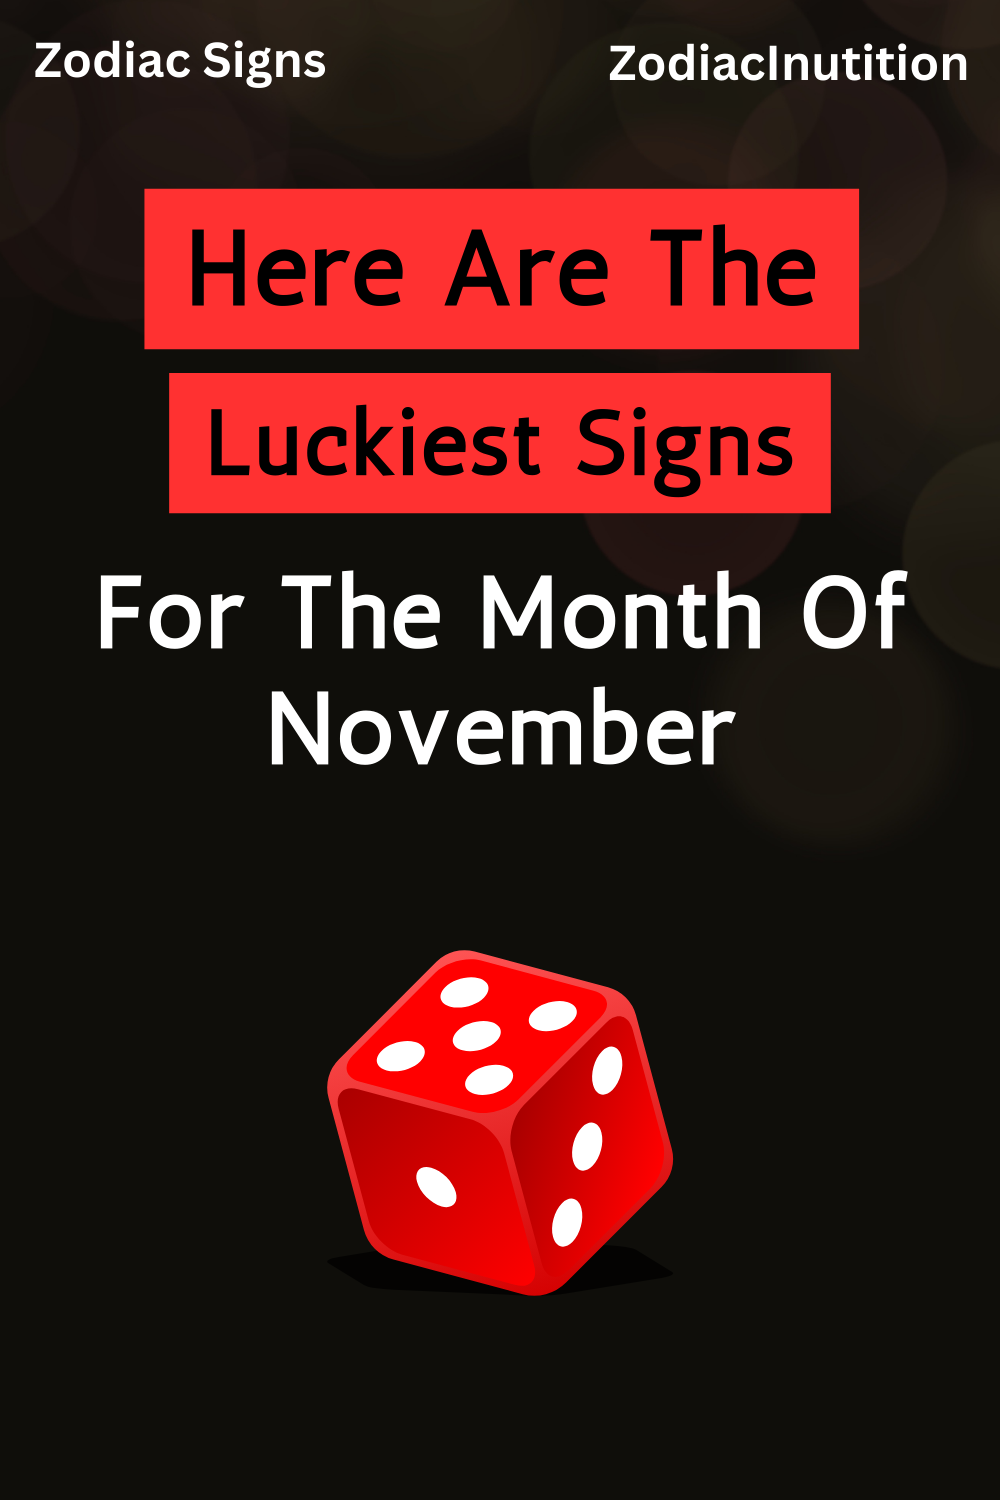 Here Are The Luckiest Signs For The Month Of November